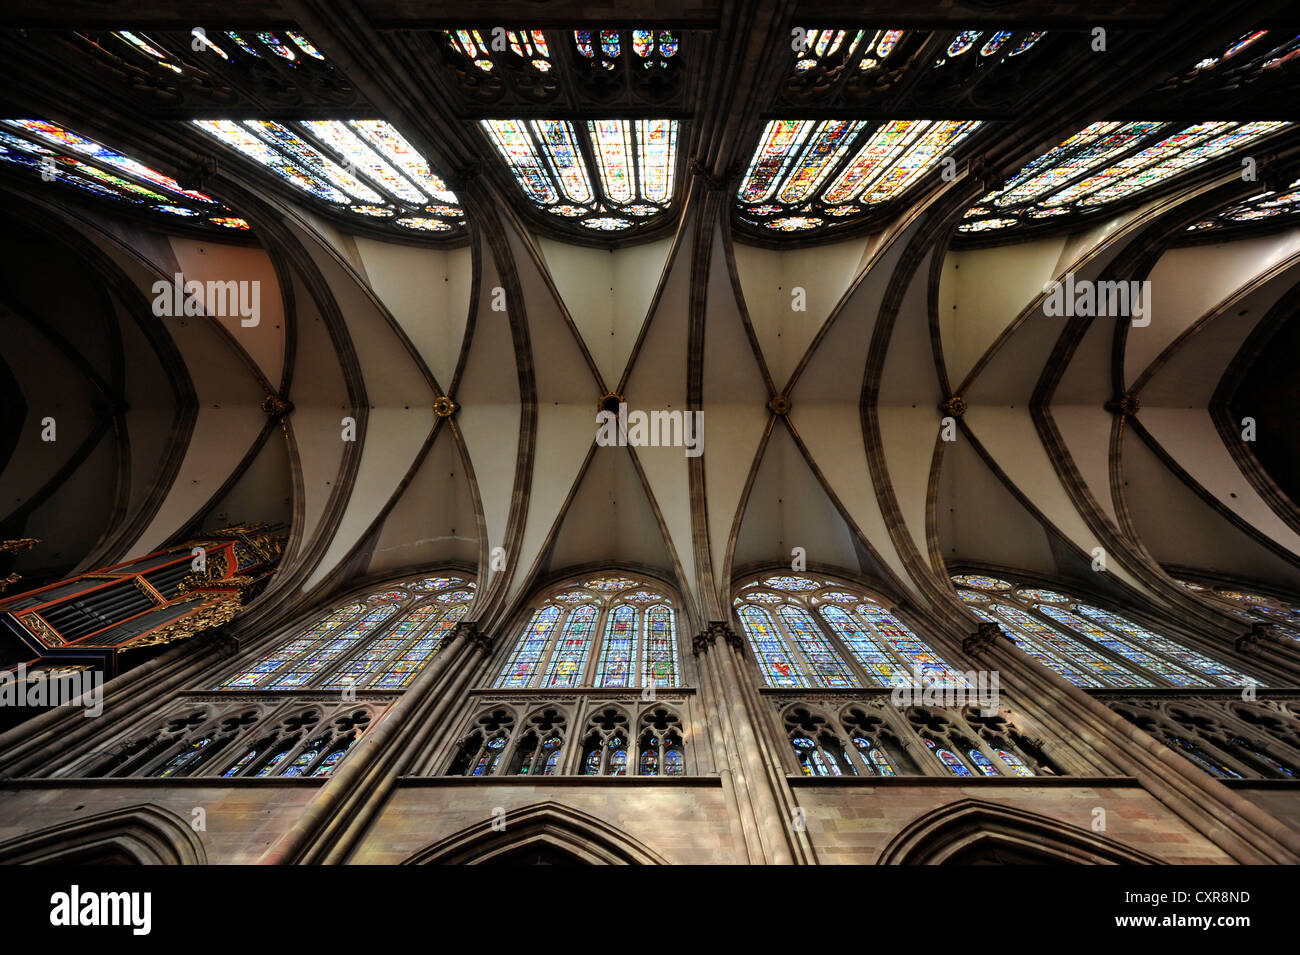 Reticulated vaulting, ceiling, nave, interior view, Strasbourg Cathedral, Cathedral of Our Lady of Strasbourg, Strasbourg Stock Photo